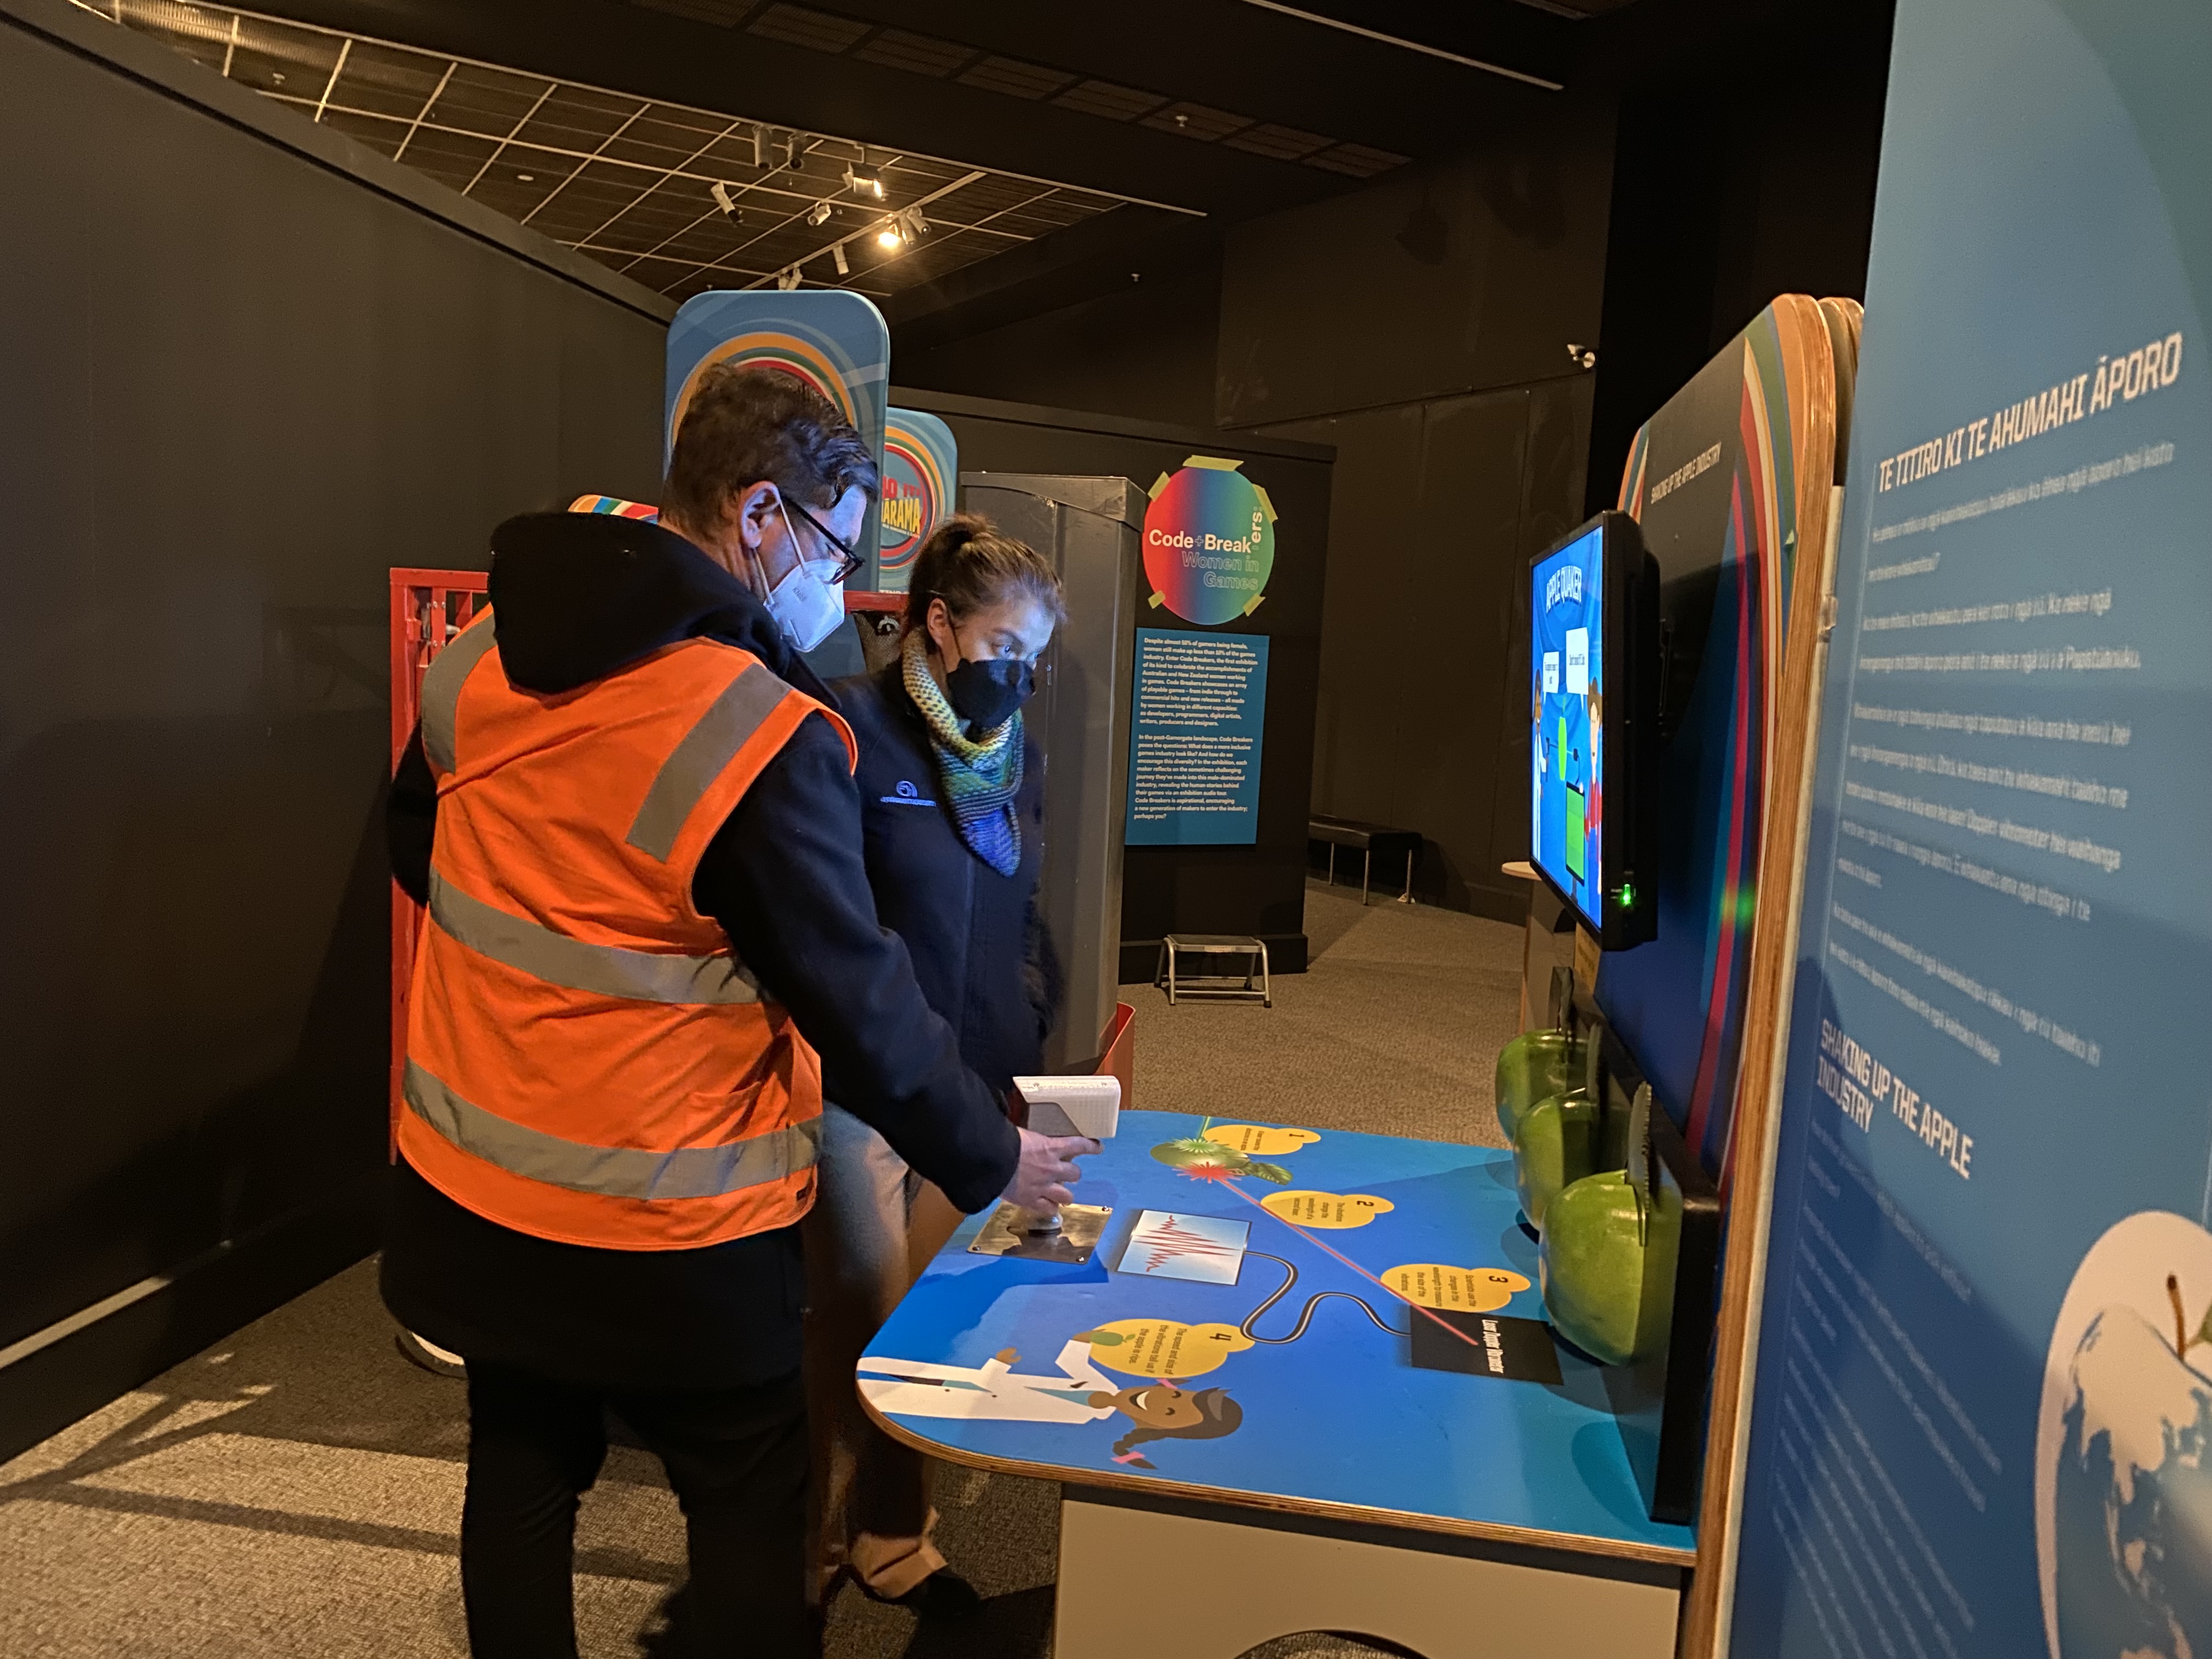 Games to delight . . . Staff members at Tuhura Otago Museum get ready for the free exhibition ...